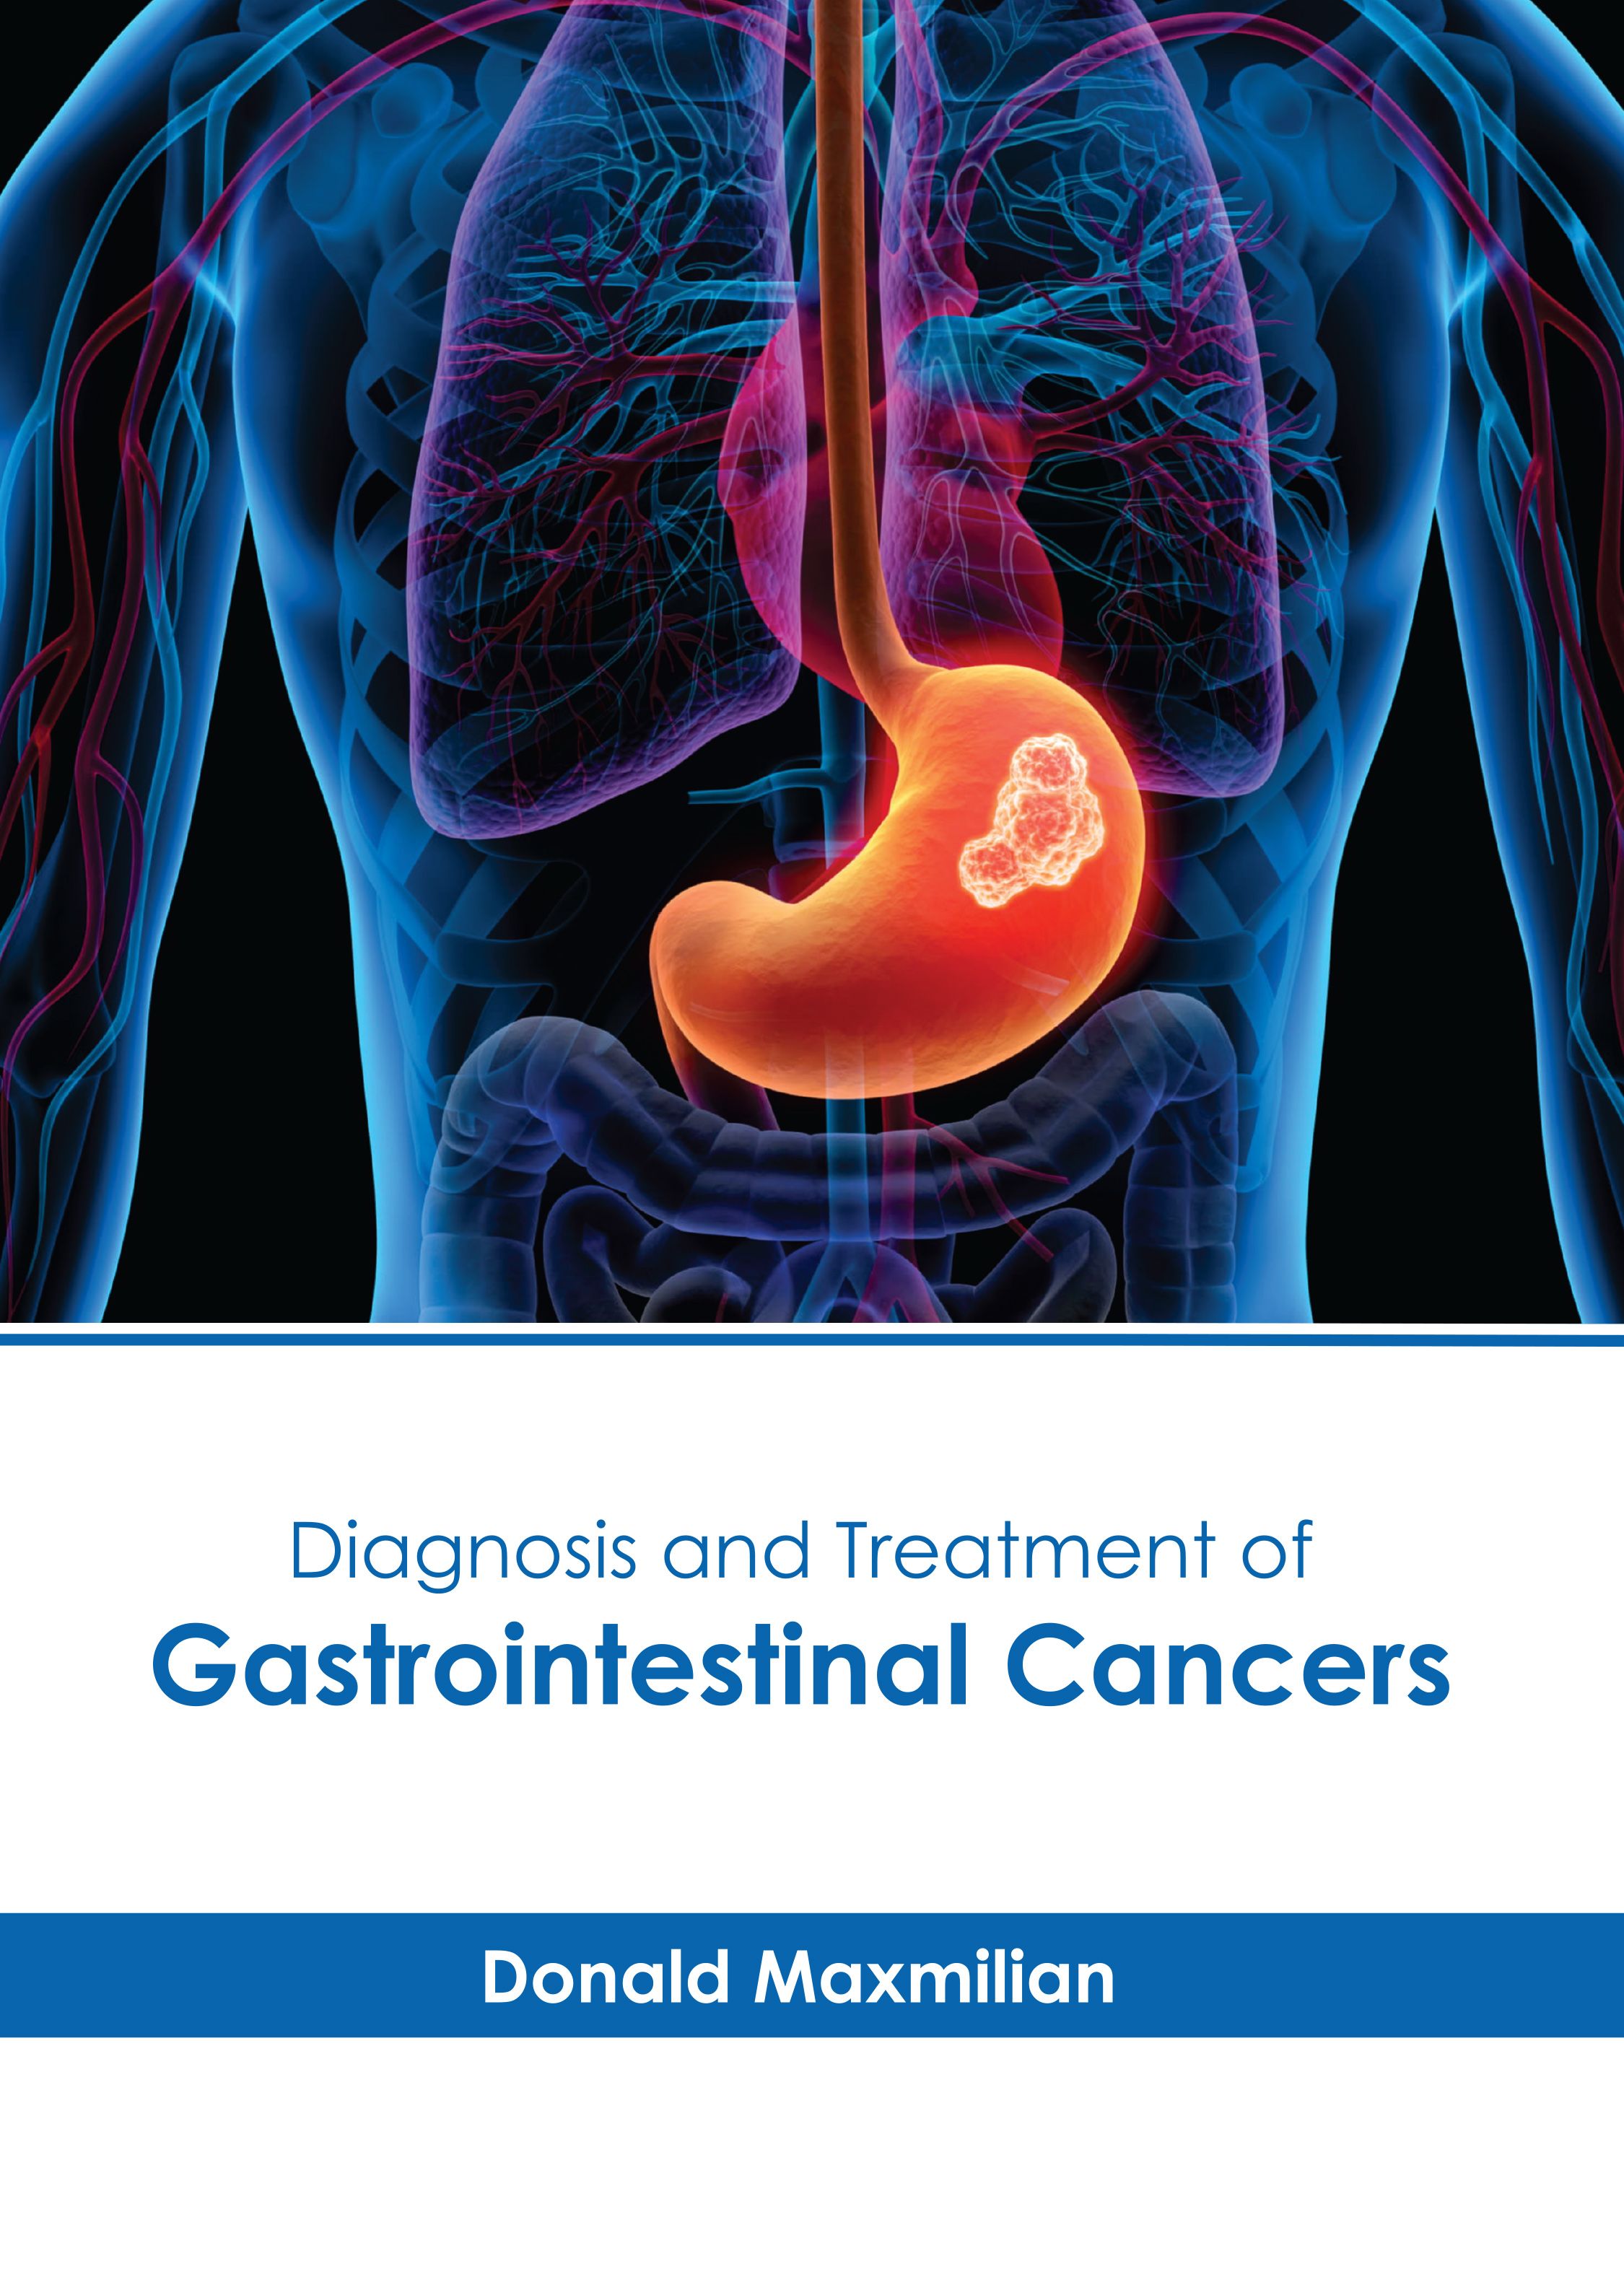 DIAGNOSIS AND TREATMENT OF GASTROINTESTINAL CANCERS